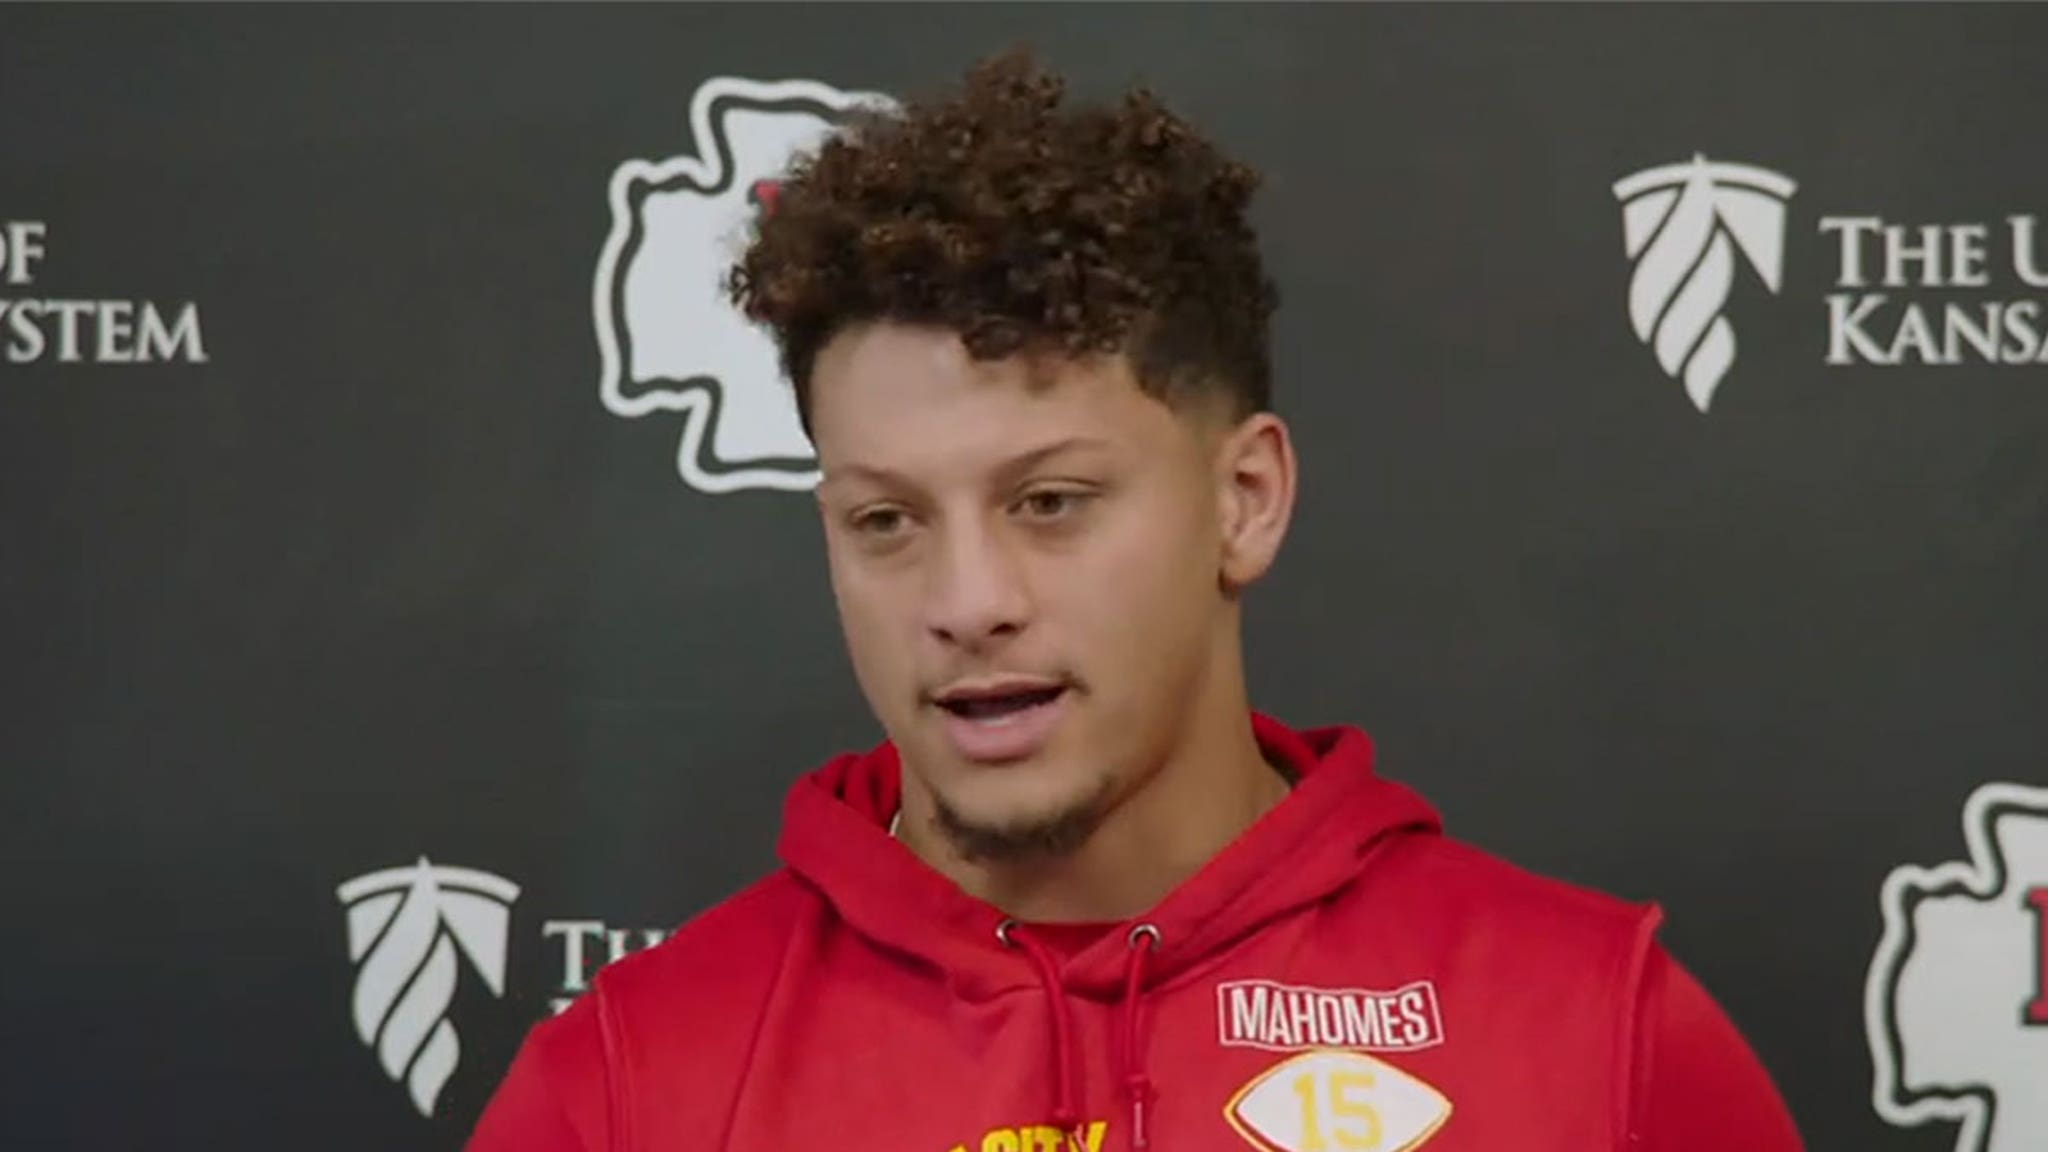 Patrick Mahomes Unhappy W/ Bro For Pouring Water On Fans, 'He'll Learn ...